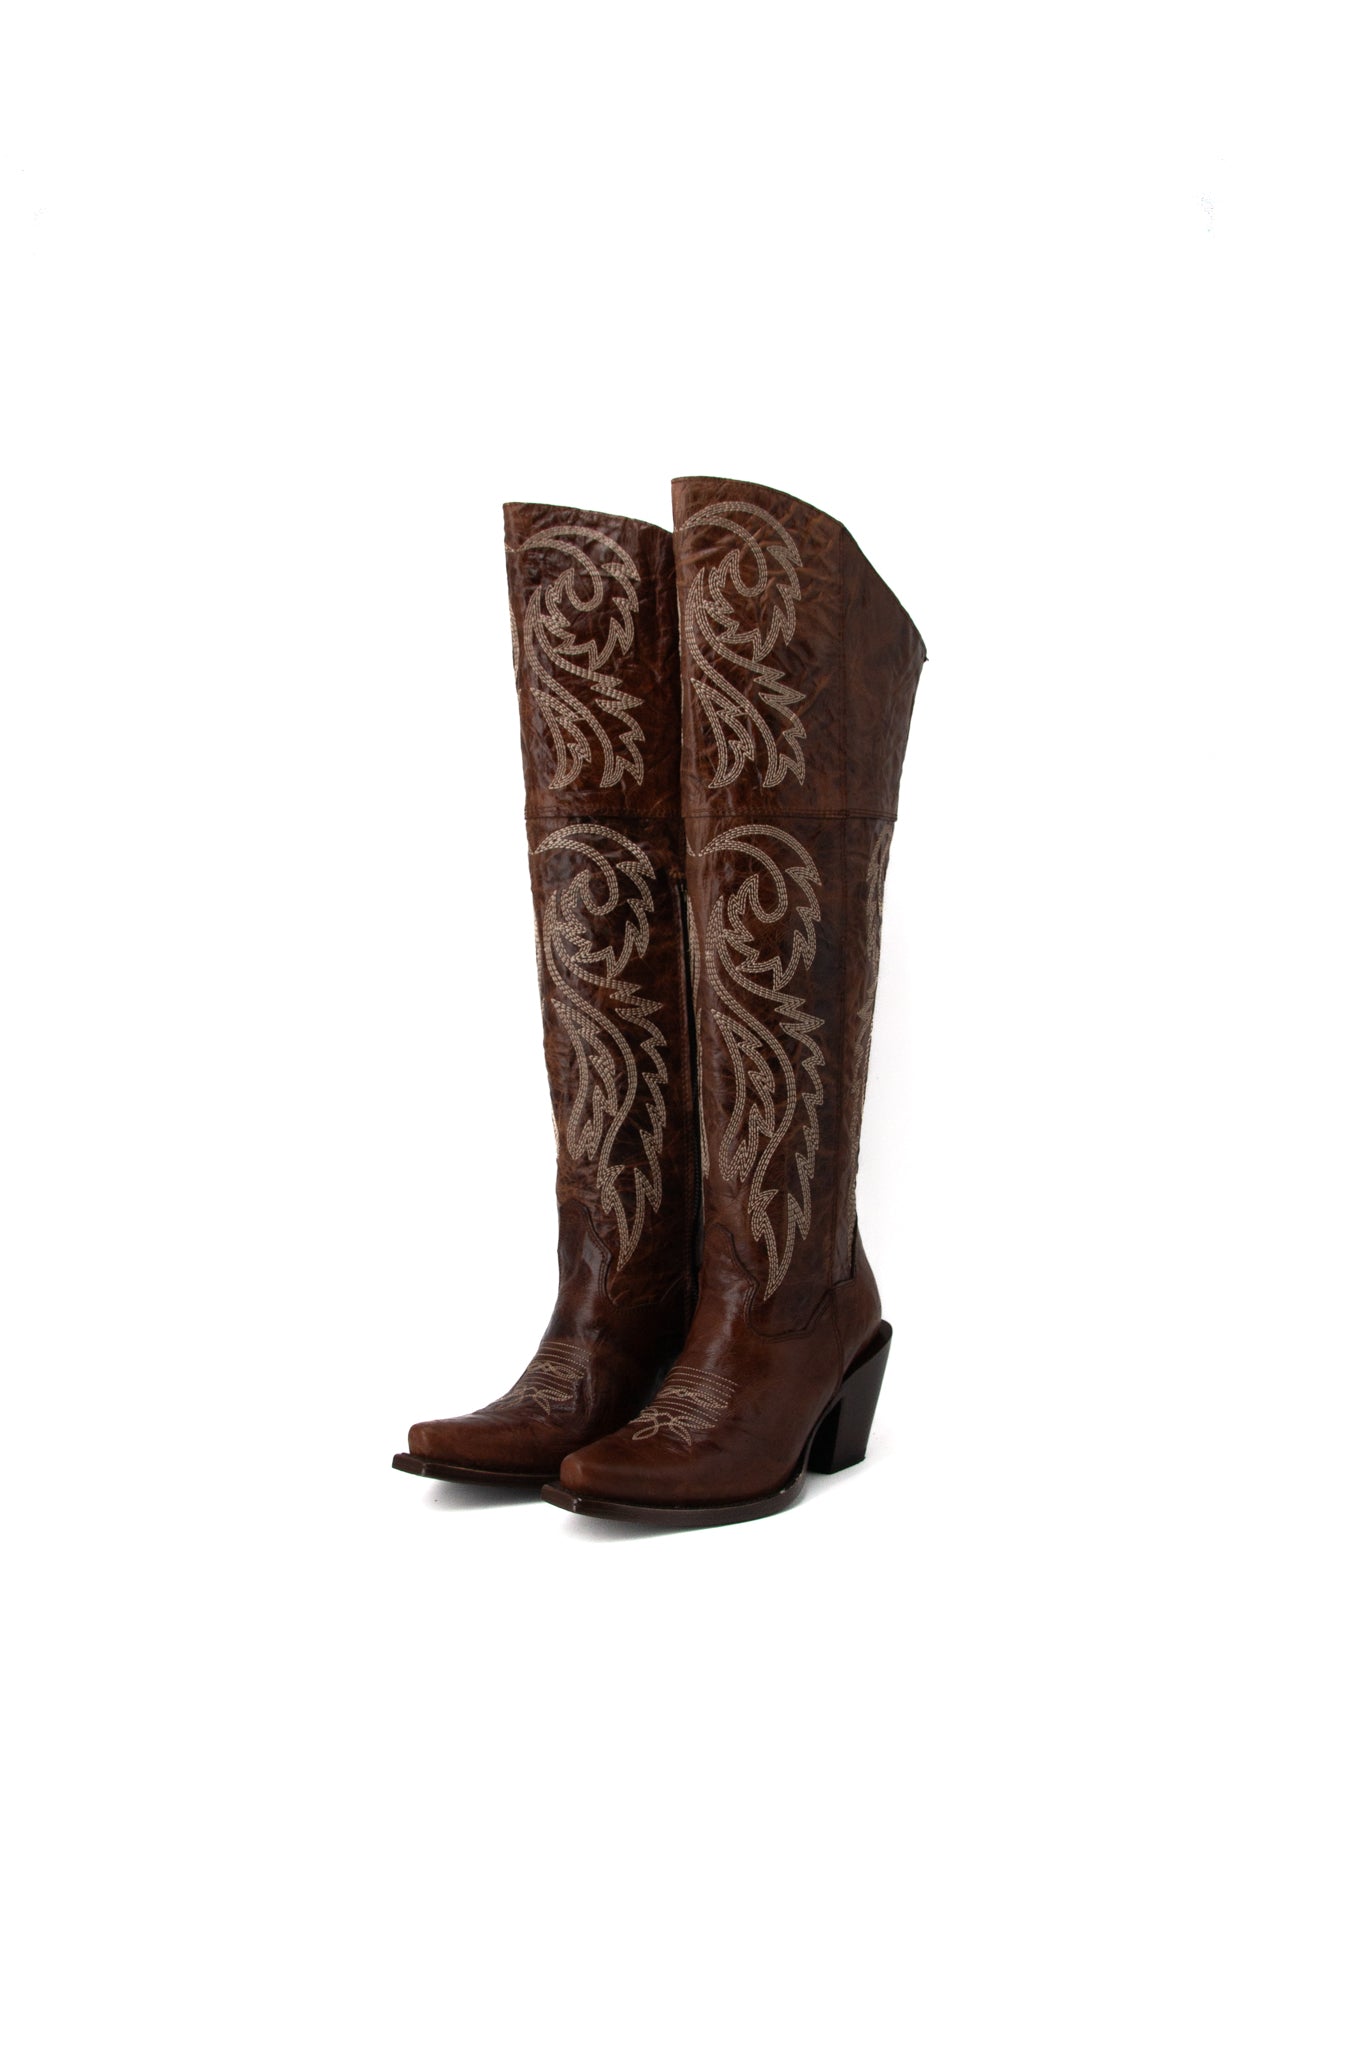 The Blanca J Knee High Boots